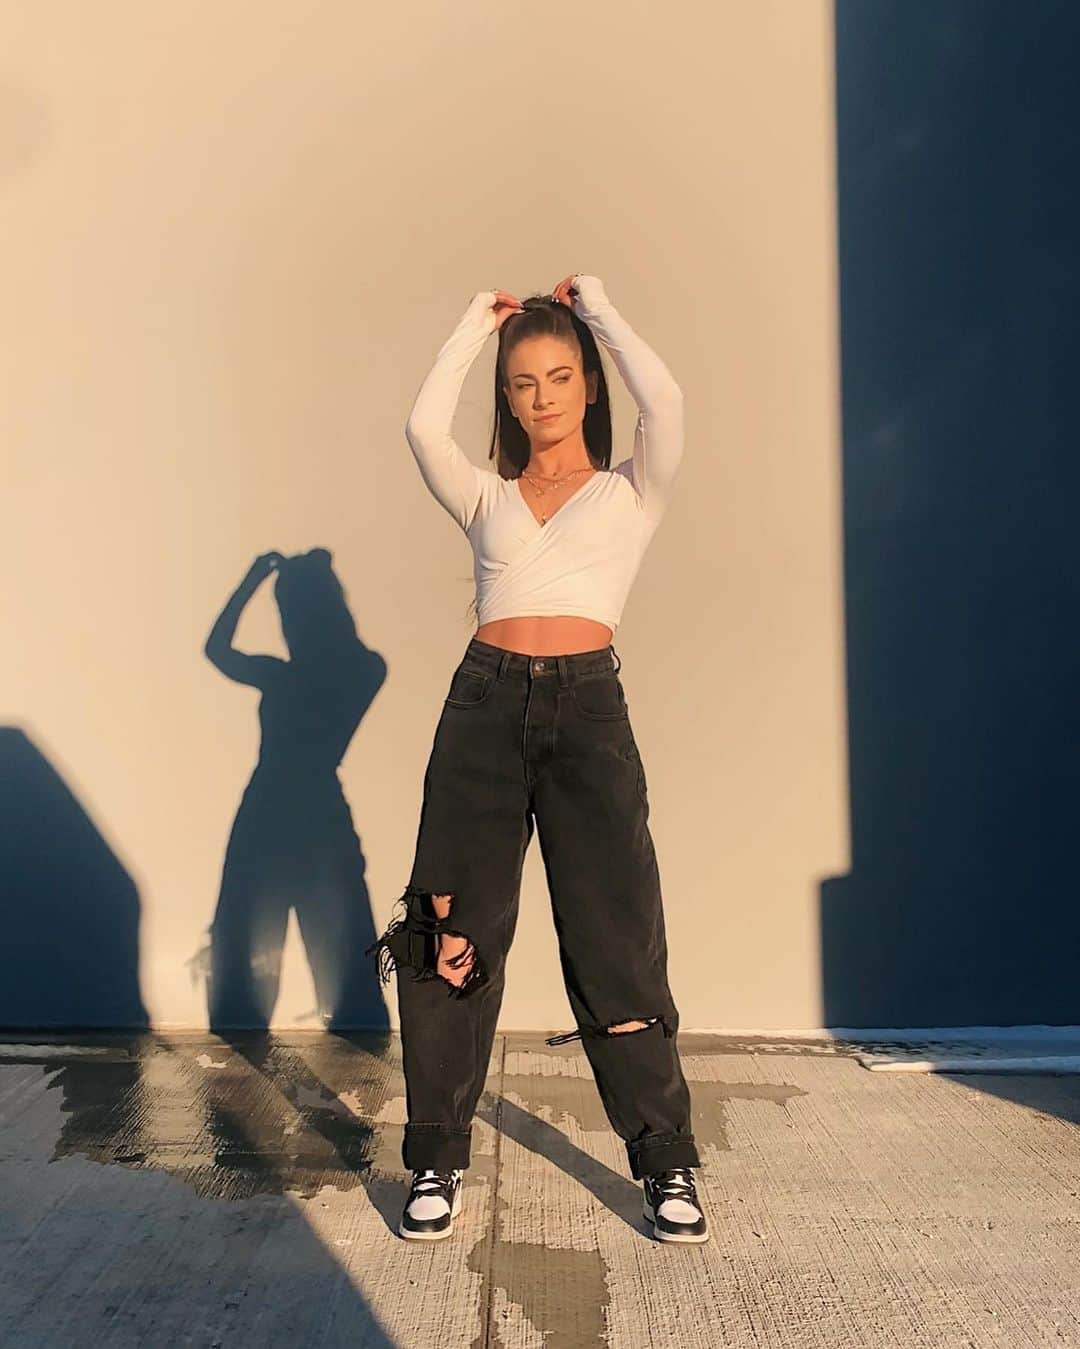 Paige Reillyのインスタグラム：「My shadow & I took advantage of golden hour today ✨☀️ I really need to take more moments to soak up the sun throughout the day. I’m inside all. day. long & often forget how good the sun is for the soul 🤍⁣ ⁣ Also, thank you to everyone who participated in telling me what content they enjoy most - it helps me so much with gauging what I should provide and when I feel stuck in a rut, it’s helpful to hear what people enjoy most 🤍 ALSO I cannot believe how many of you said snowboarding 🥲 that makes me so happy because it’s so outside of the realm of content most people originally found me from and it’s my favorite thing to do, so hearing you enjoy seeing it is the best feeling 🙏🏻 I’m going tomorrow so hopefully a new snowboard vlog / posts will be comin ASAP 🙌🏻」